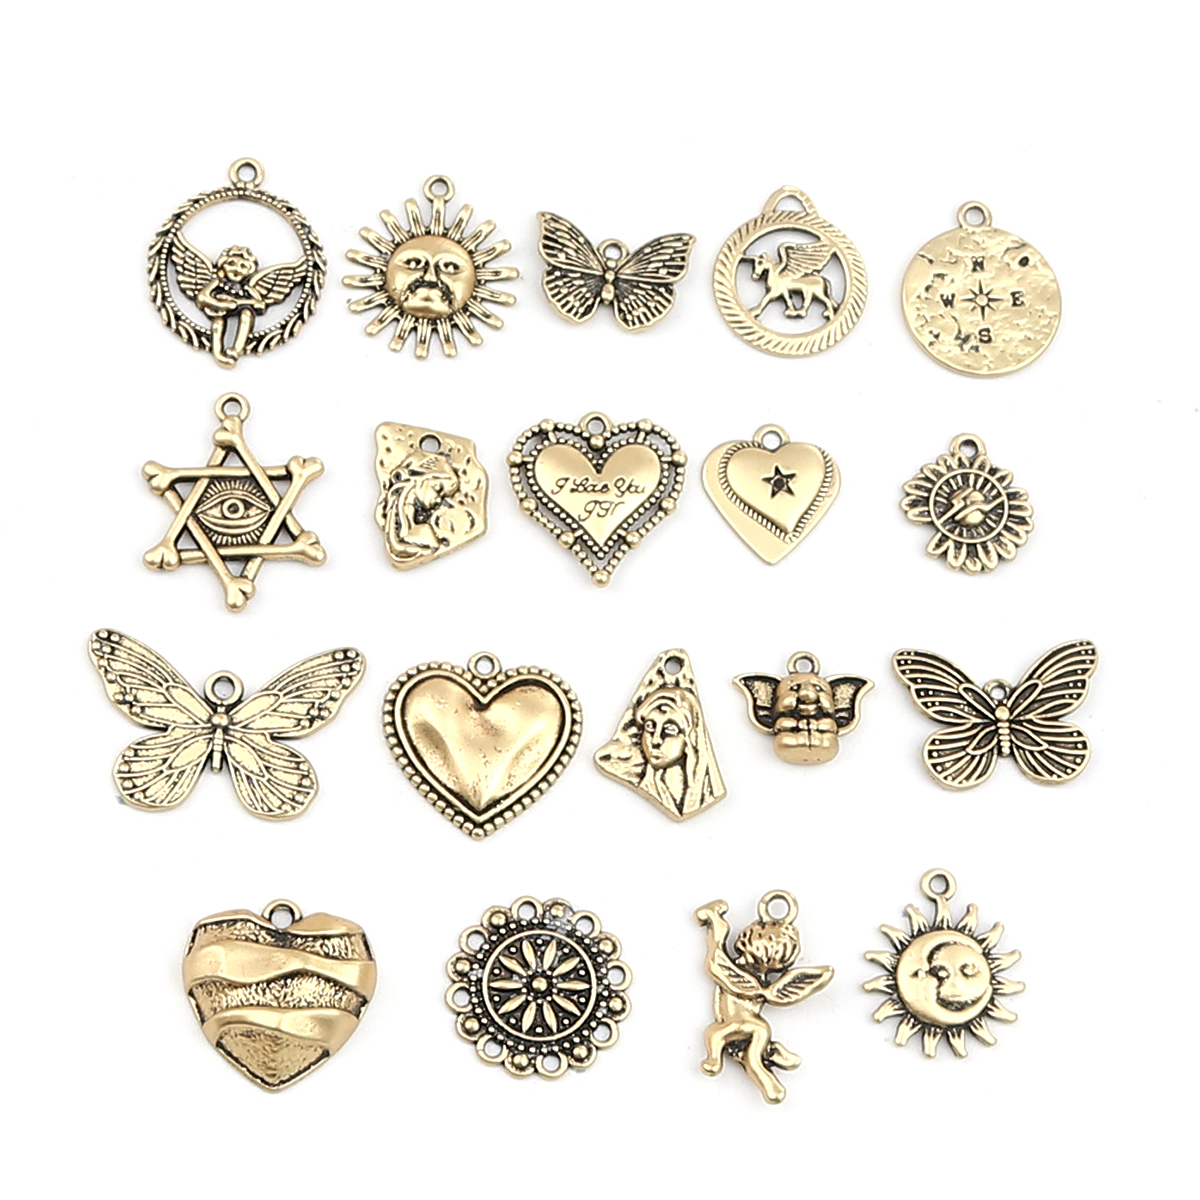 Picture of Zinc Based Alloy Charms Elephant Animal Gold Tone Antique Gold 15mm x 12mm, 10 PCs